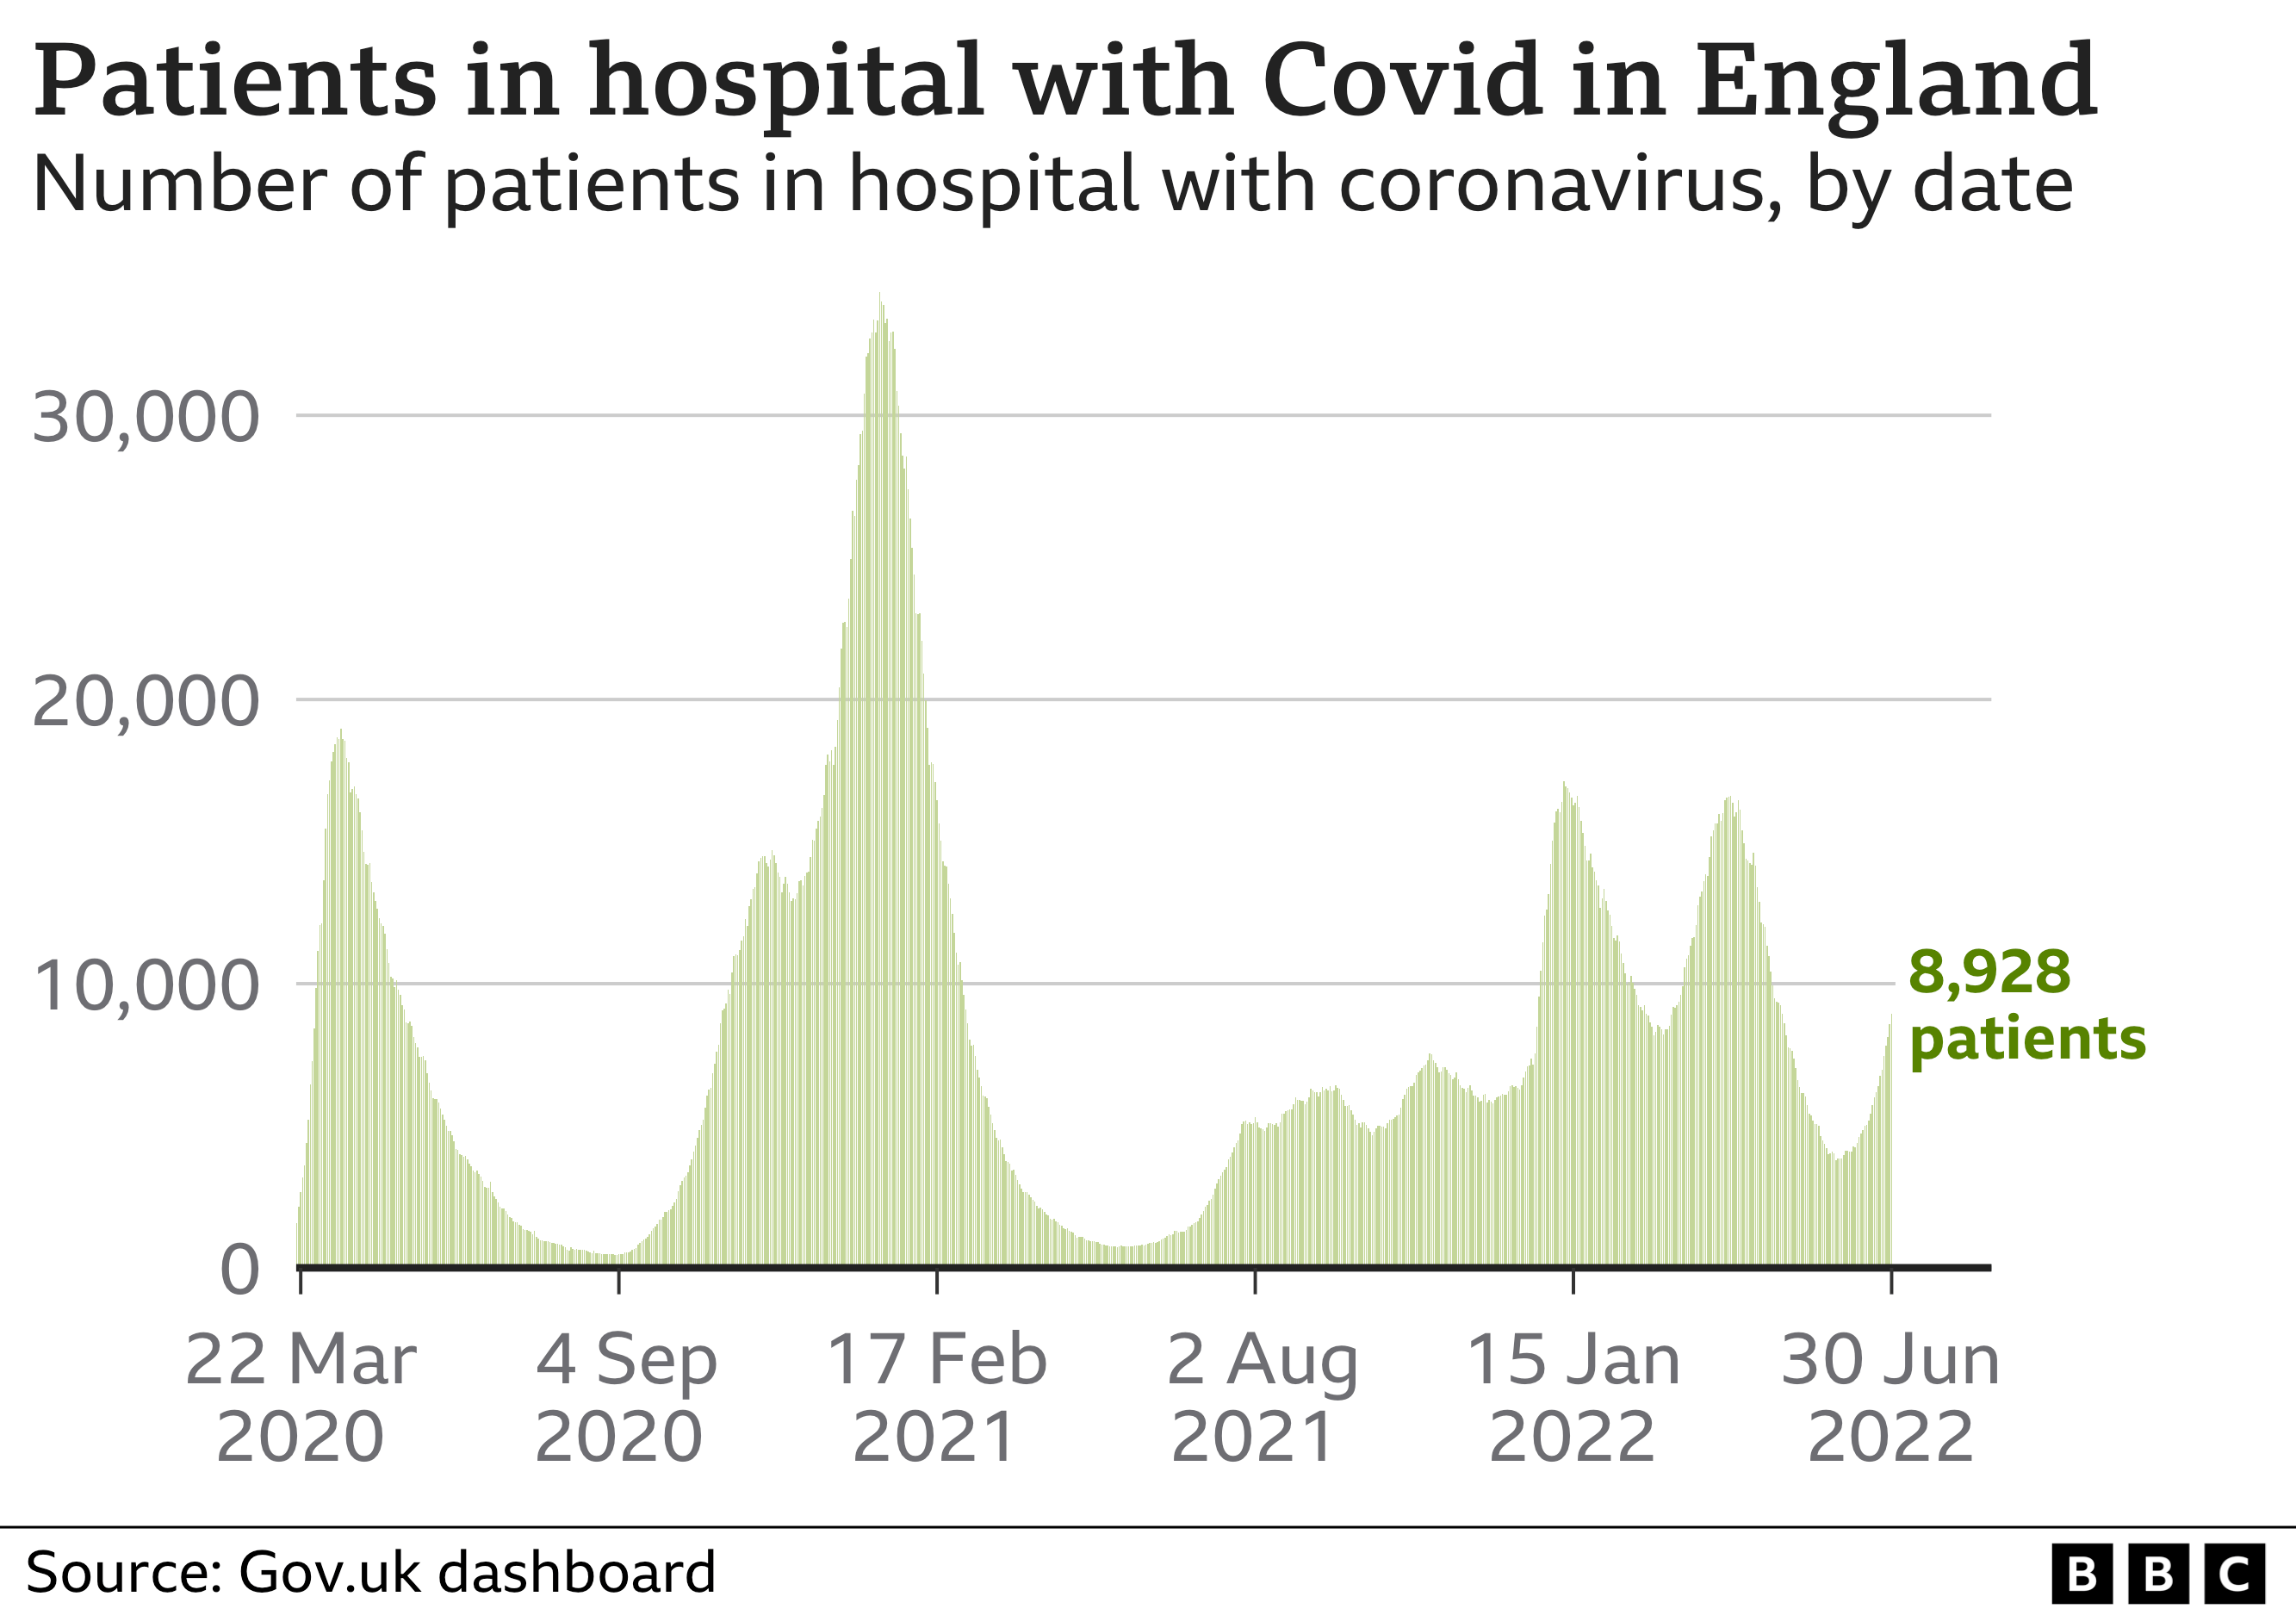 Covid patients in hospital in England